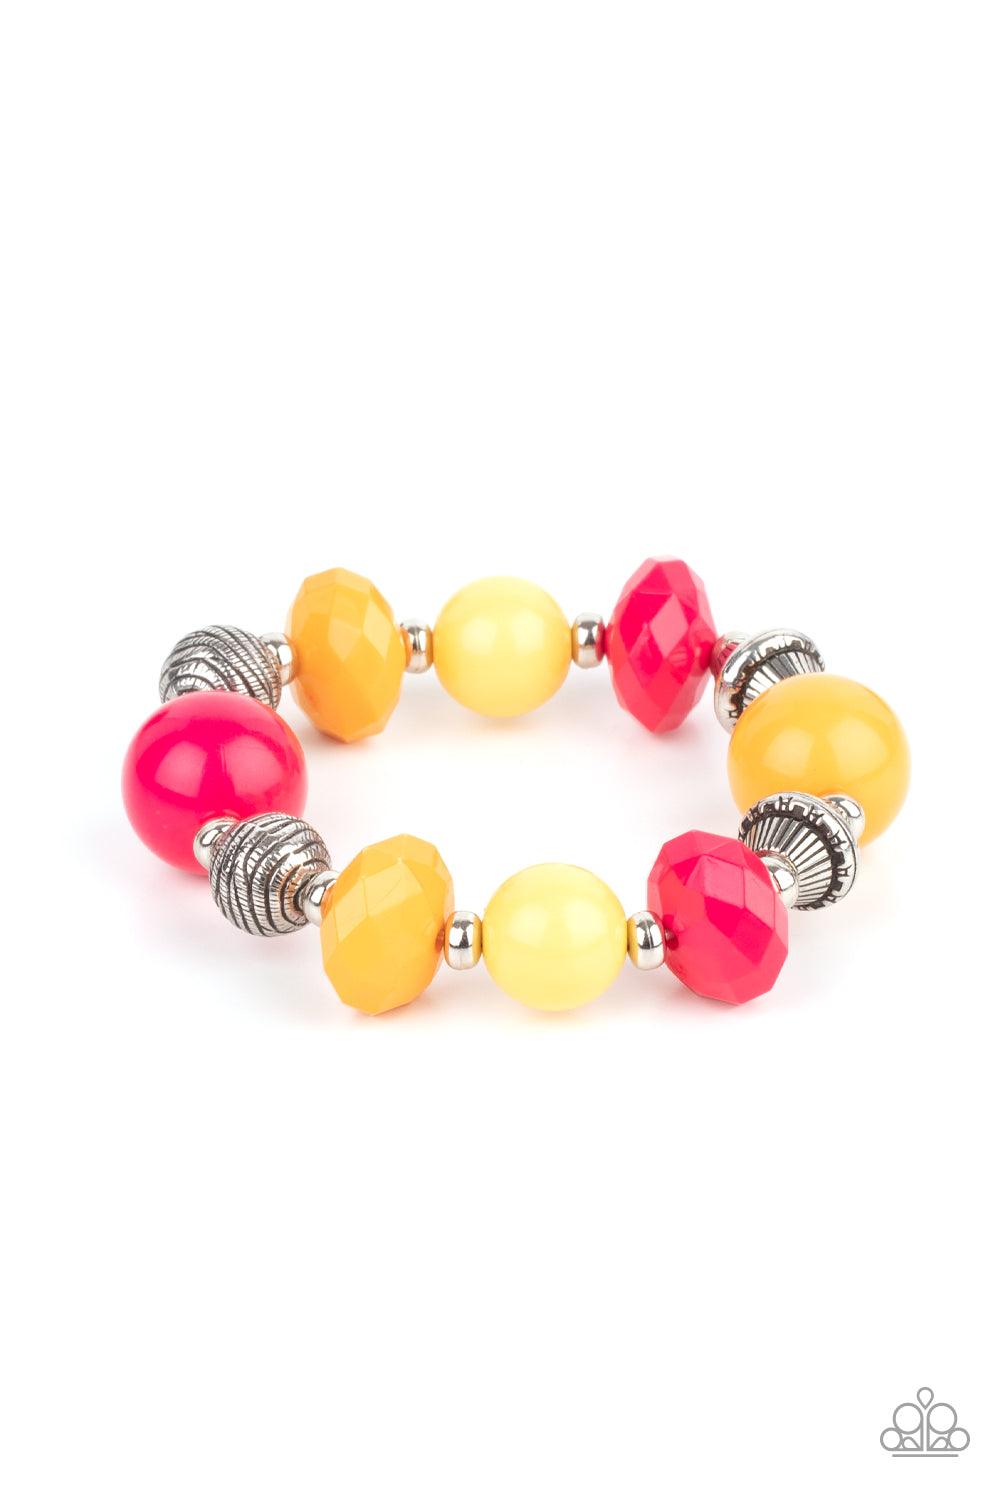 Paparazzi Accessories Day Trip Discovery - Multi A collection of brightly colored Raspberry Sorbet, Marigold, and Primrose beads in smooth round and faceted shapes, are threaded along a stretchy band. Accents of silver beads etched in linear designs adds